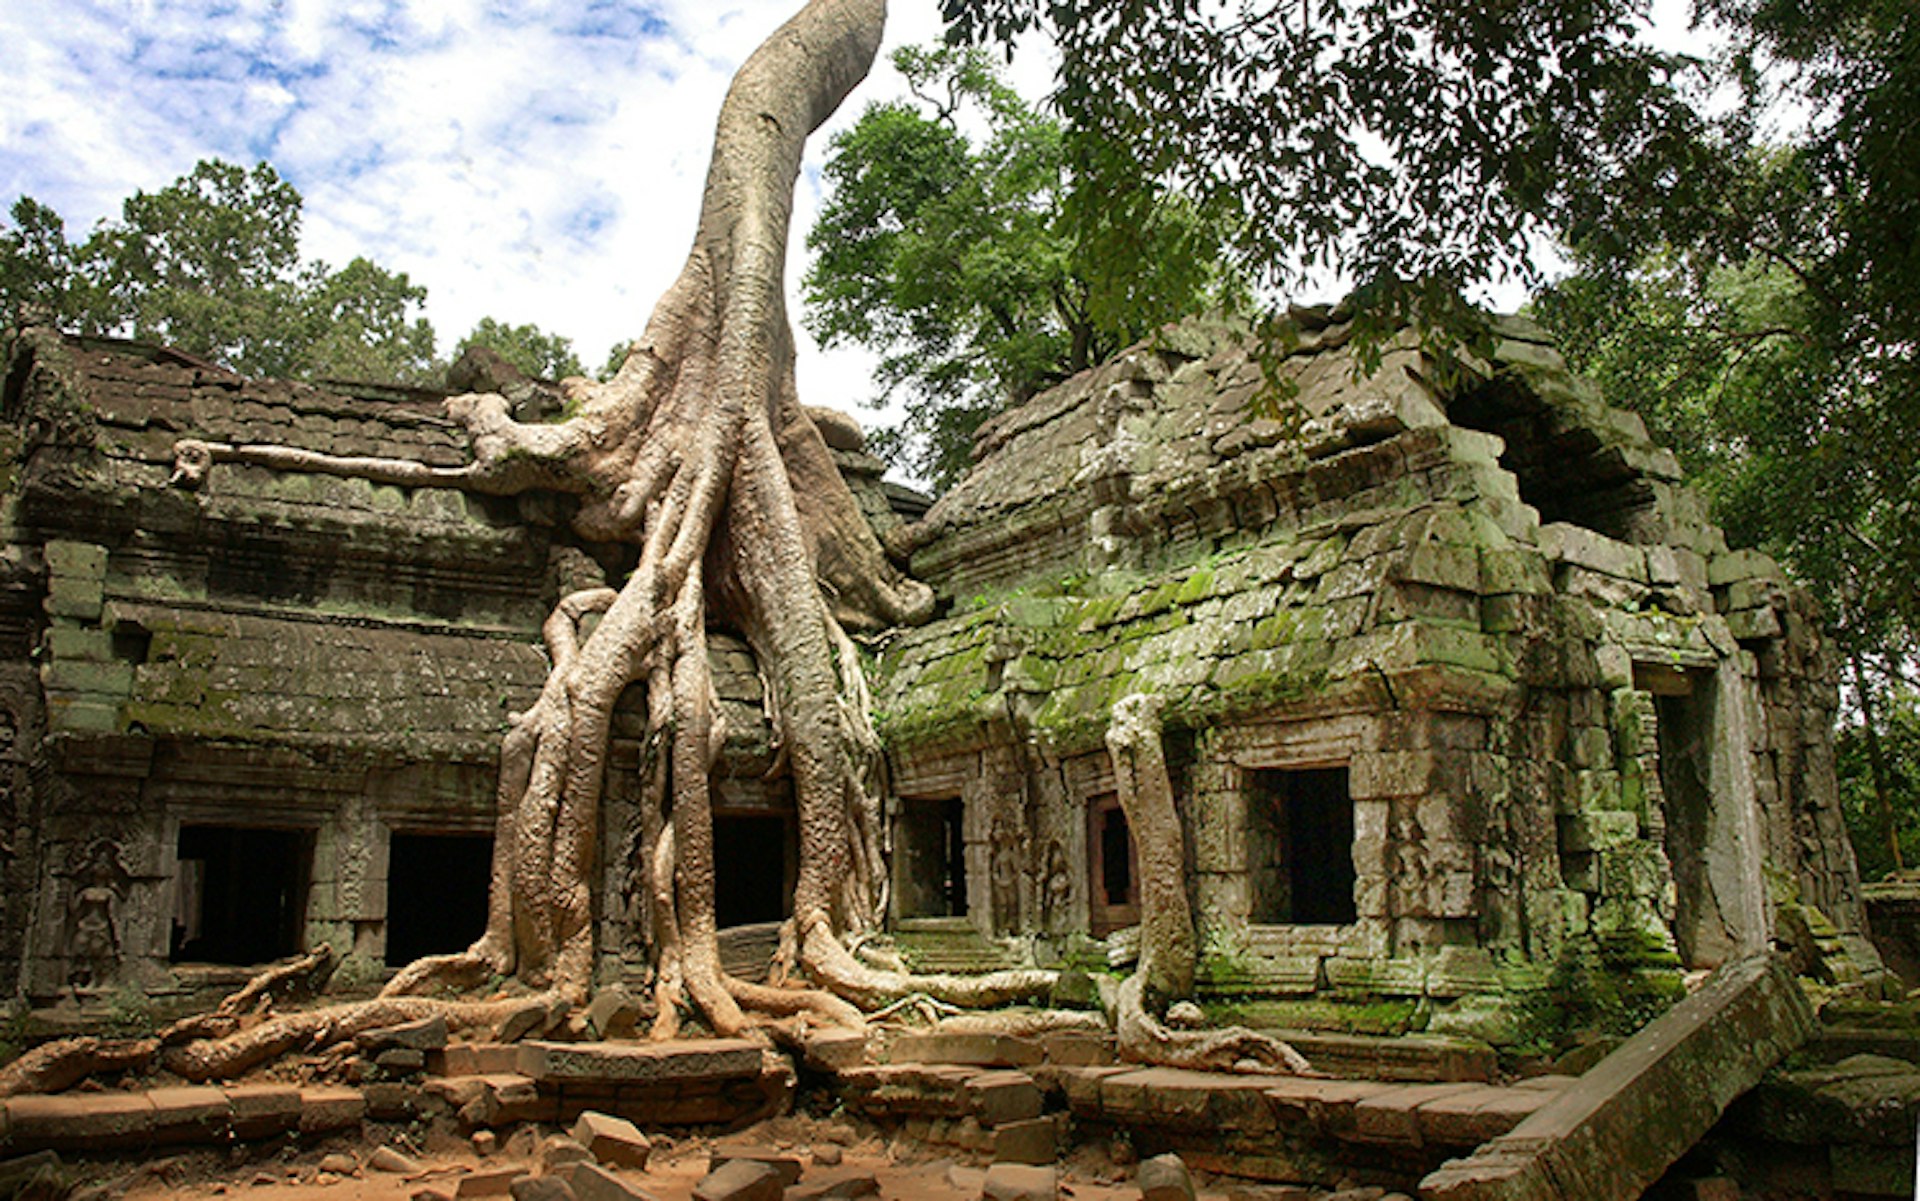 The creeping roots of spung trees add to the atmosphere of Ta Prohm's crumbling temples. Image by Ignacio Palacios / Lonely Planet Images / Getty Images